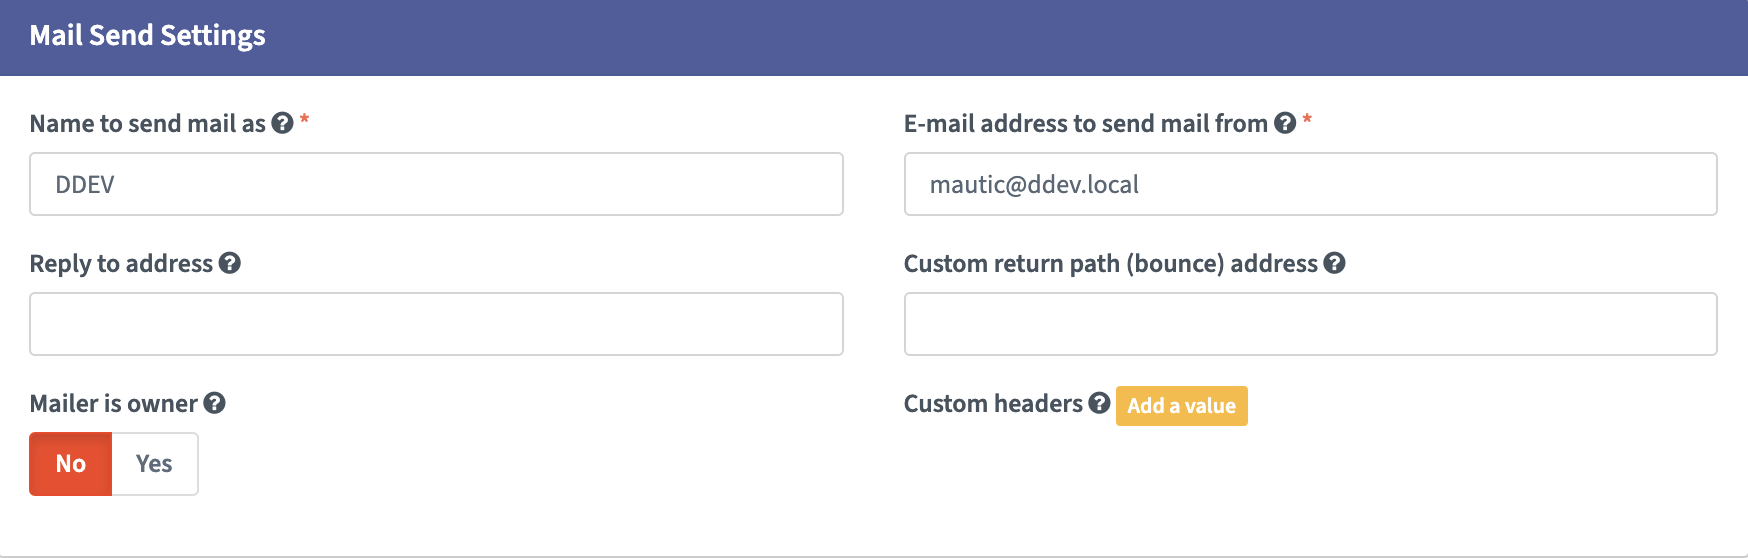 Screenshot showing Mail Send Settings Configuration in Mautic